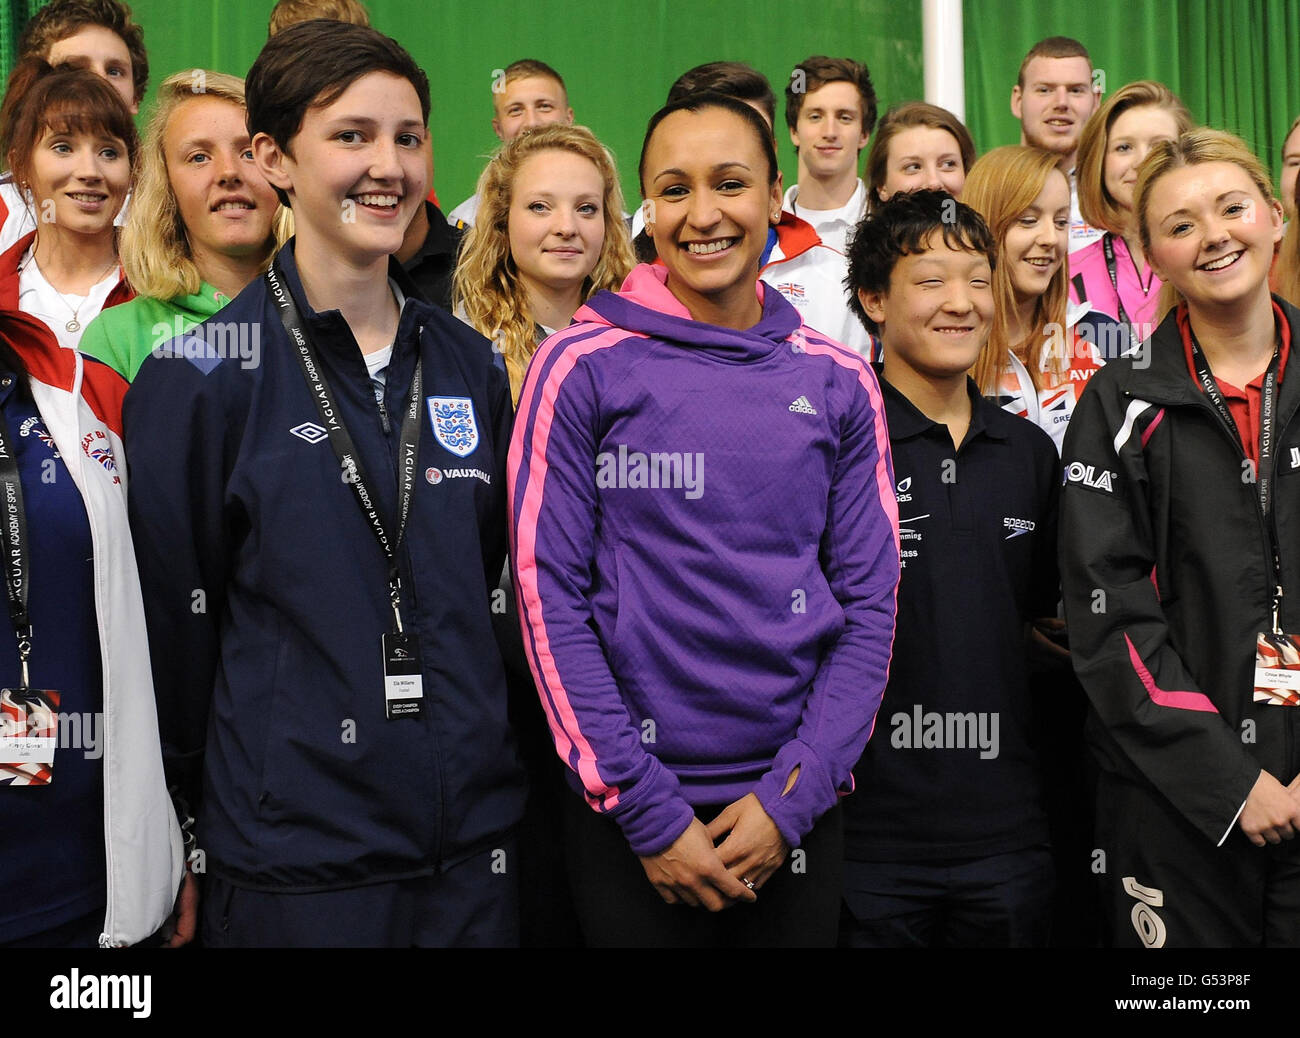 Great Britain's Jessica Ennis meets young athletes during the Jaguar Academy of Sport Awards and Workshop event at the English Insititute of Sport, Sheffield. Stock Photo